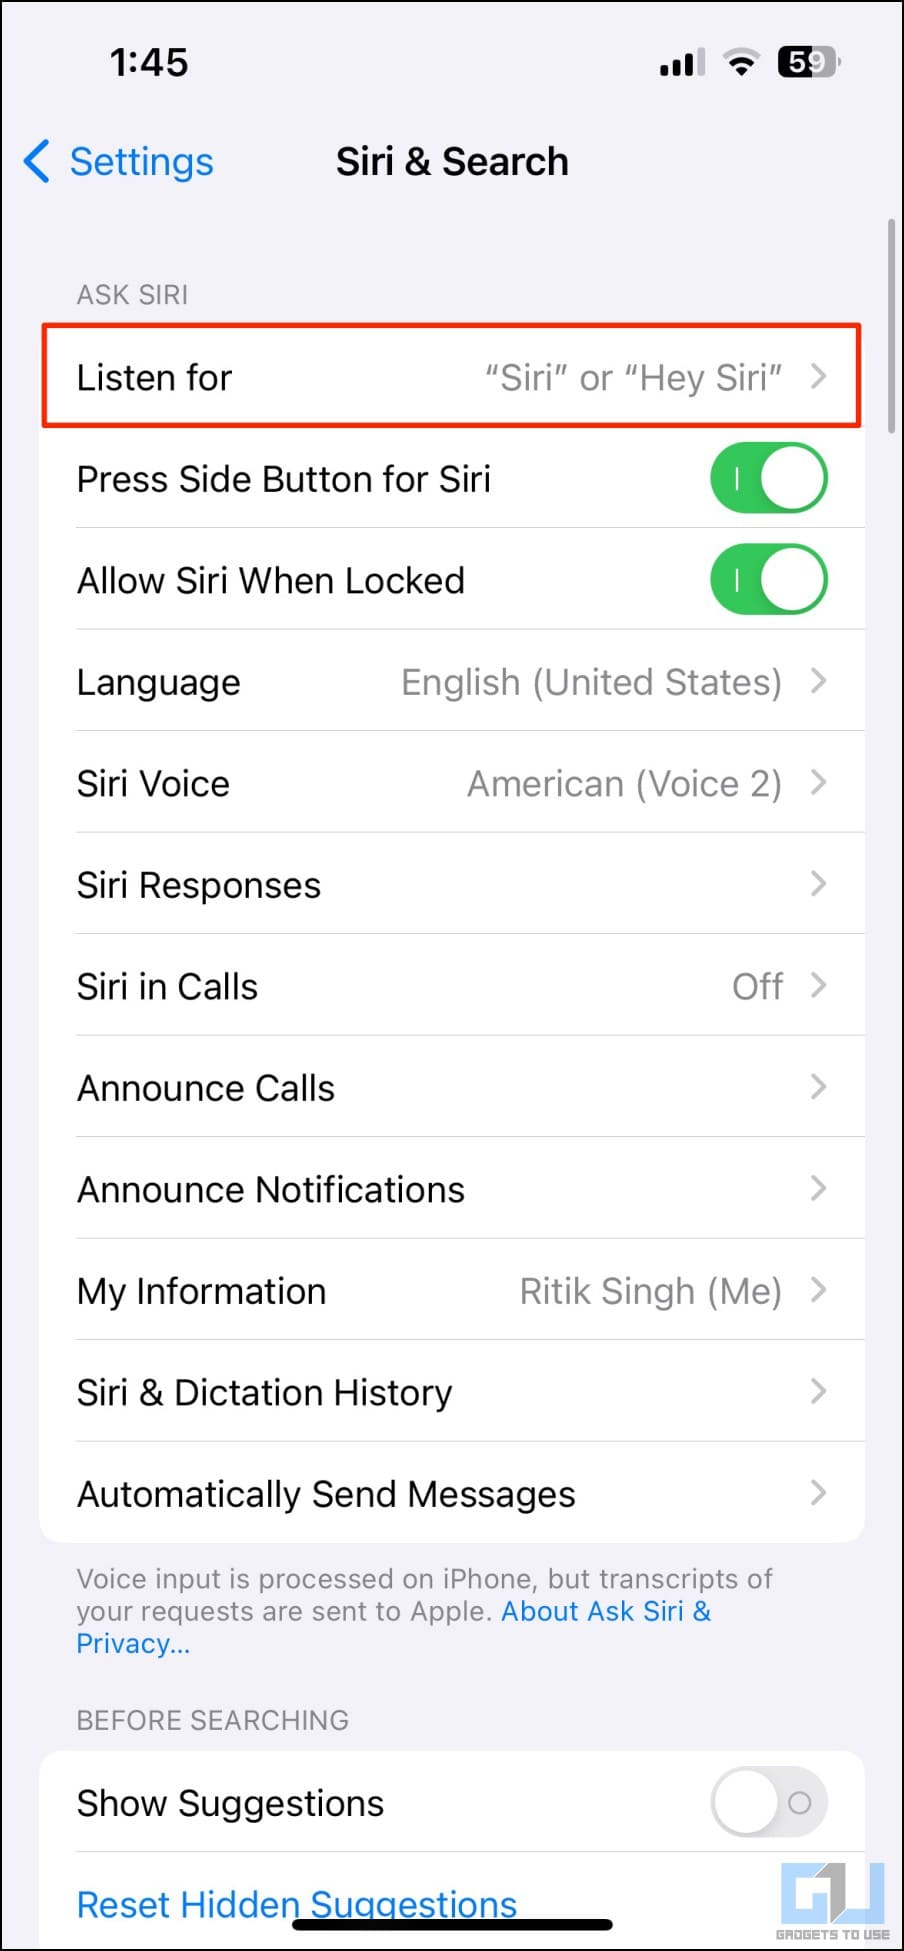 Can't Find Listen for in Siri Settings